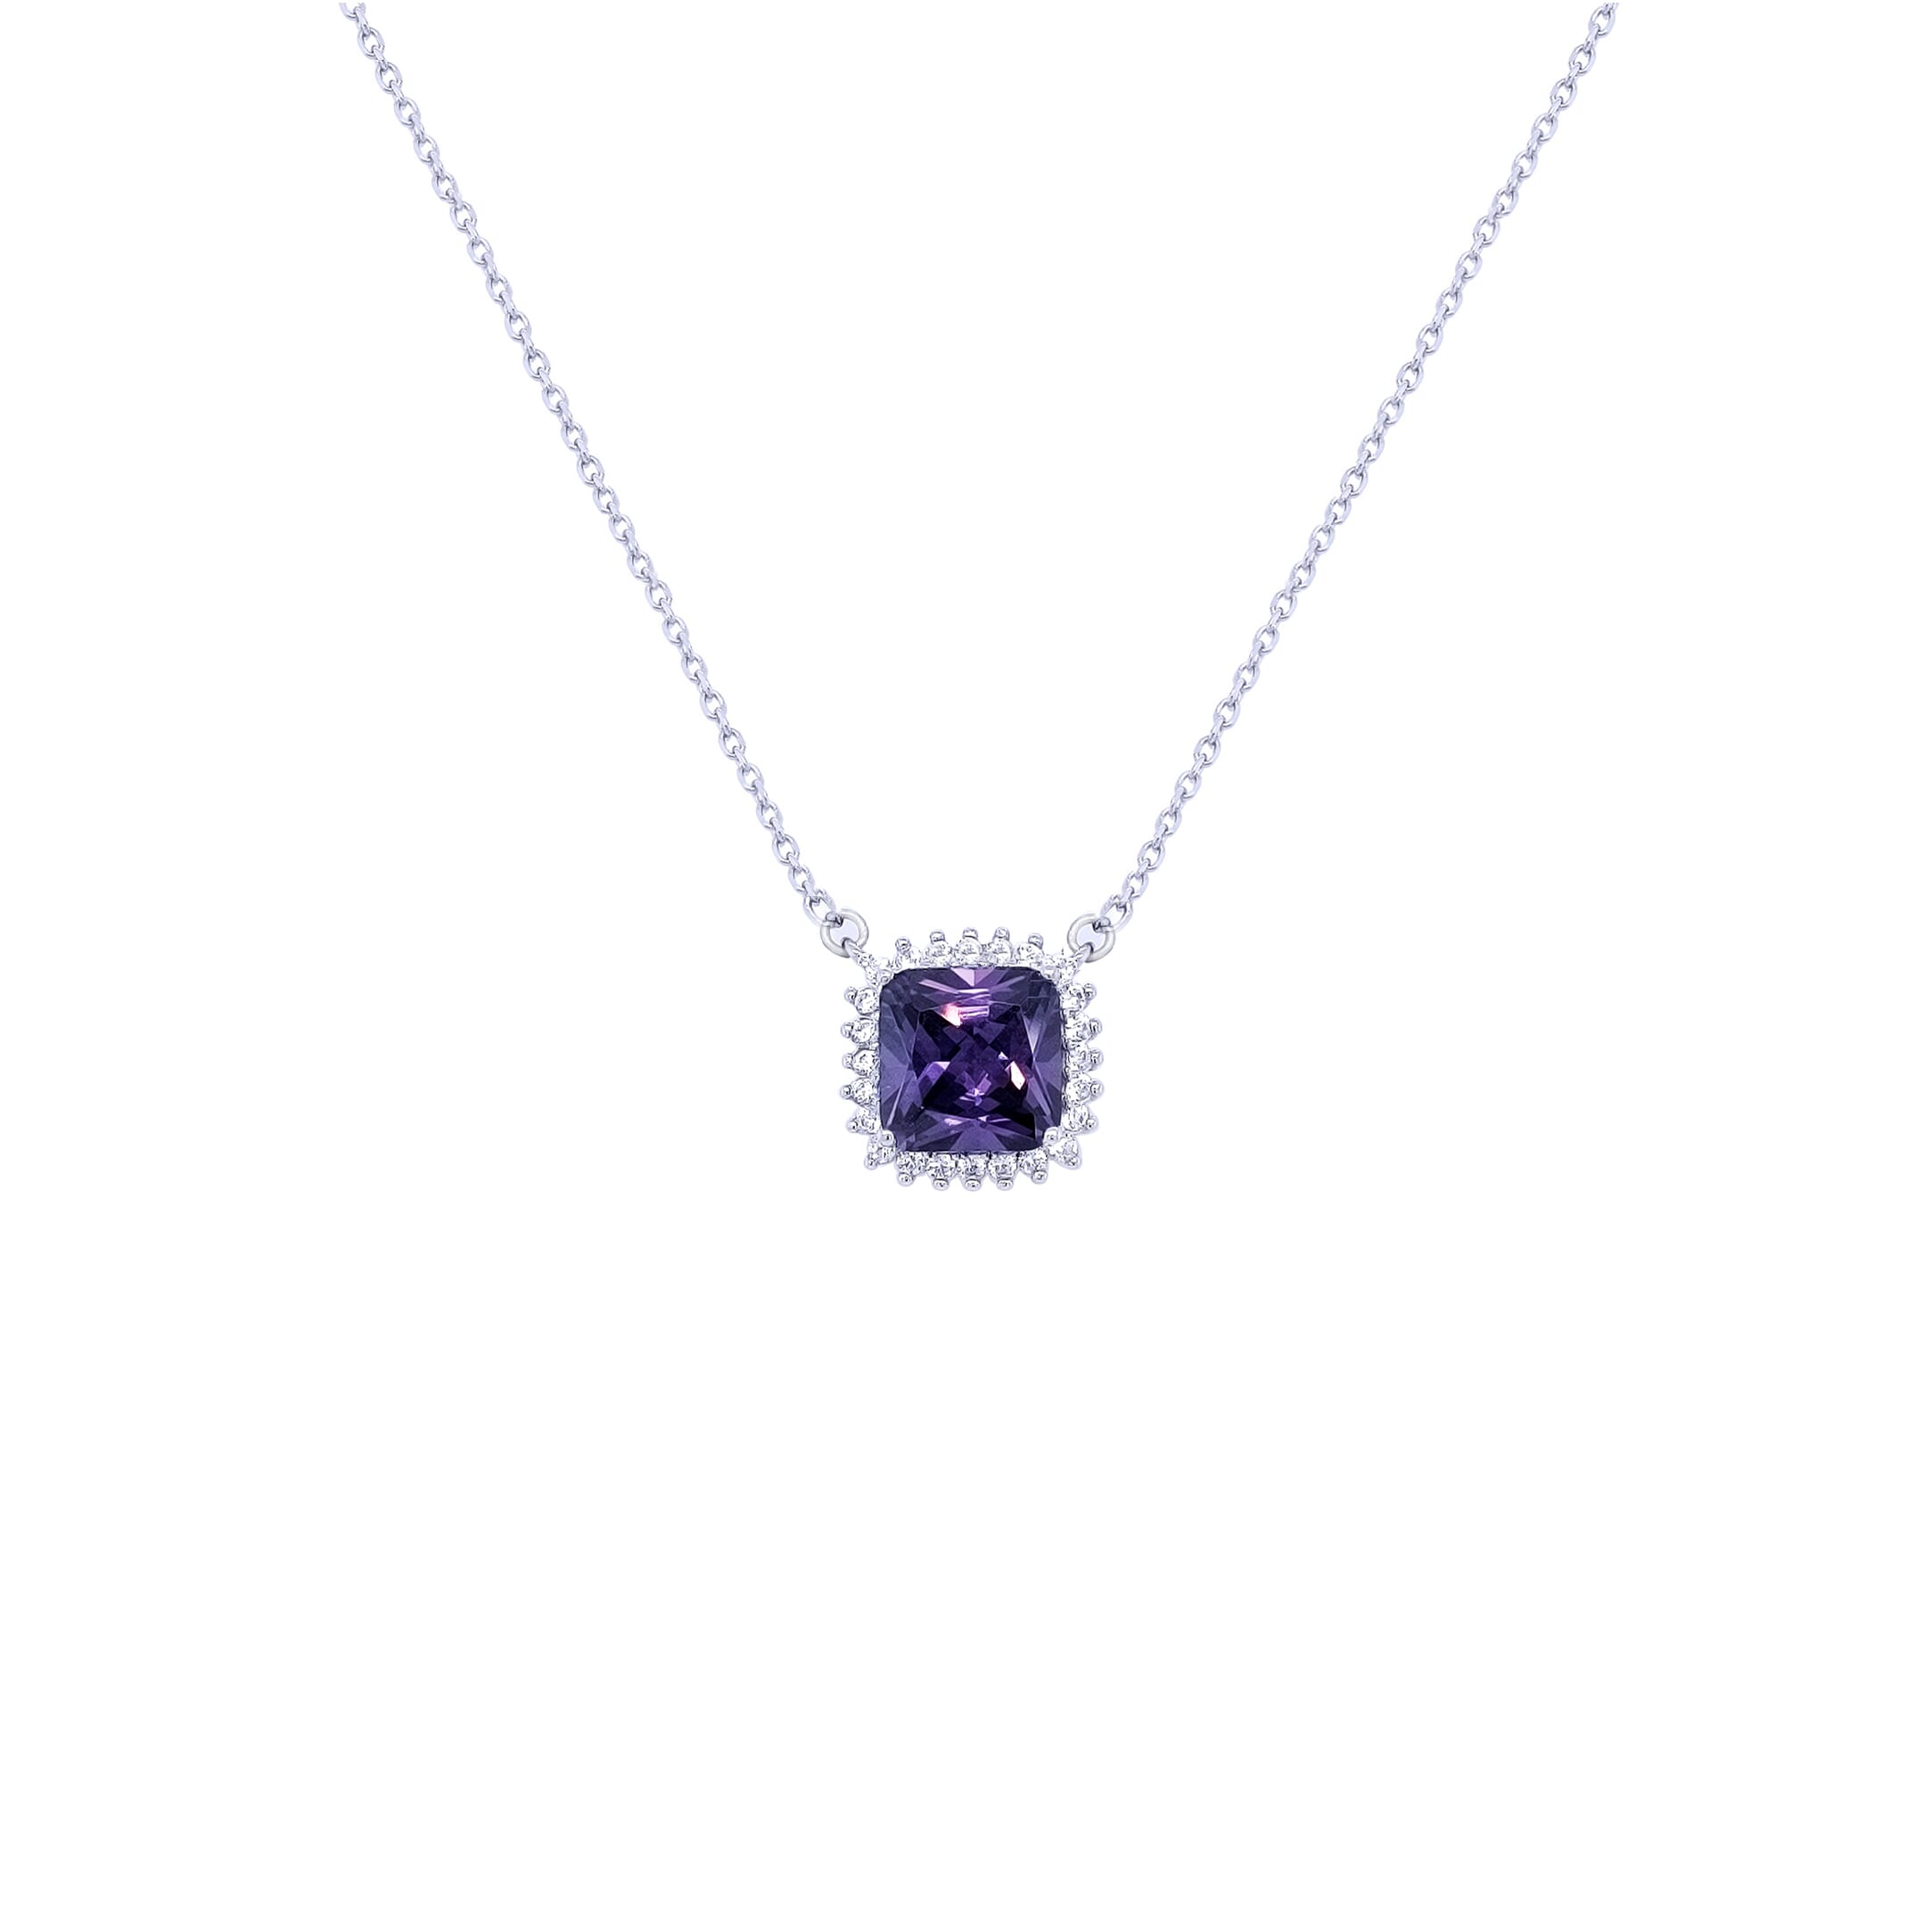 Asfour Sterling Silver 925 With A Square Design Pendant Decorated With Colored Stones